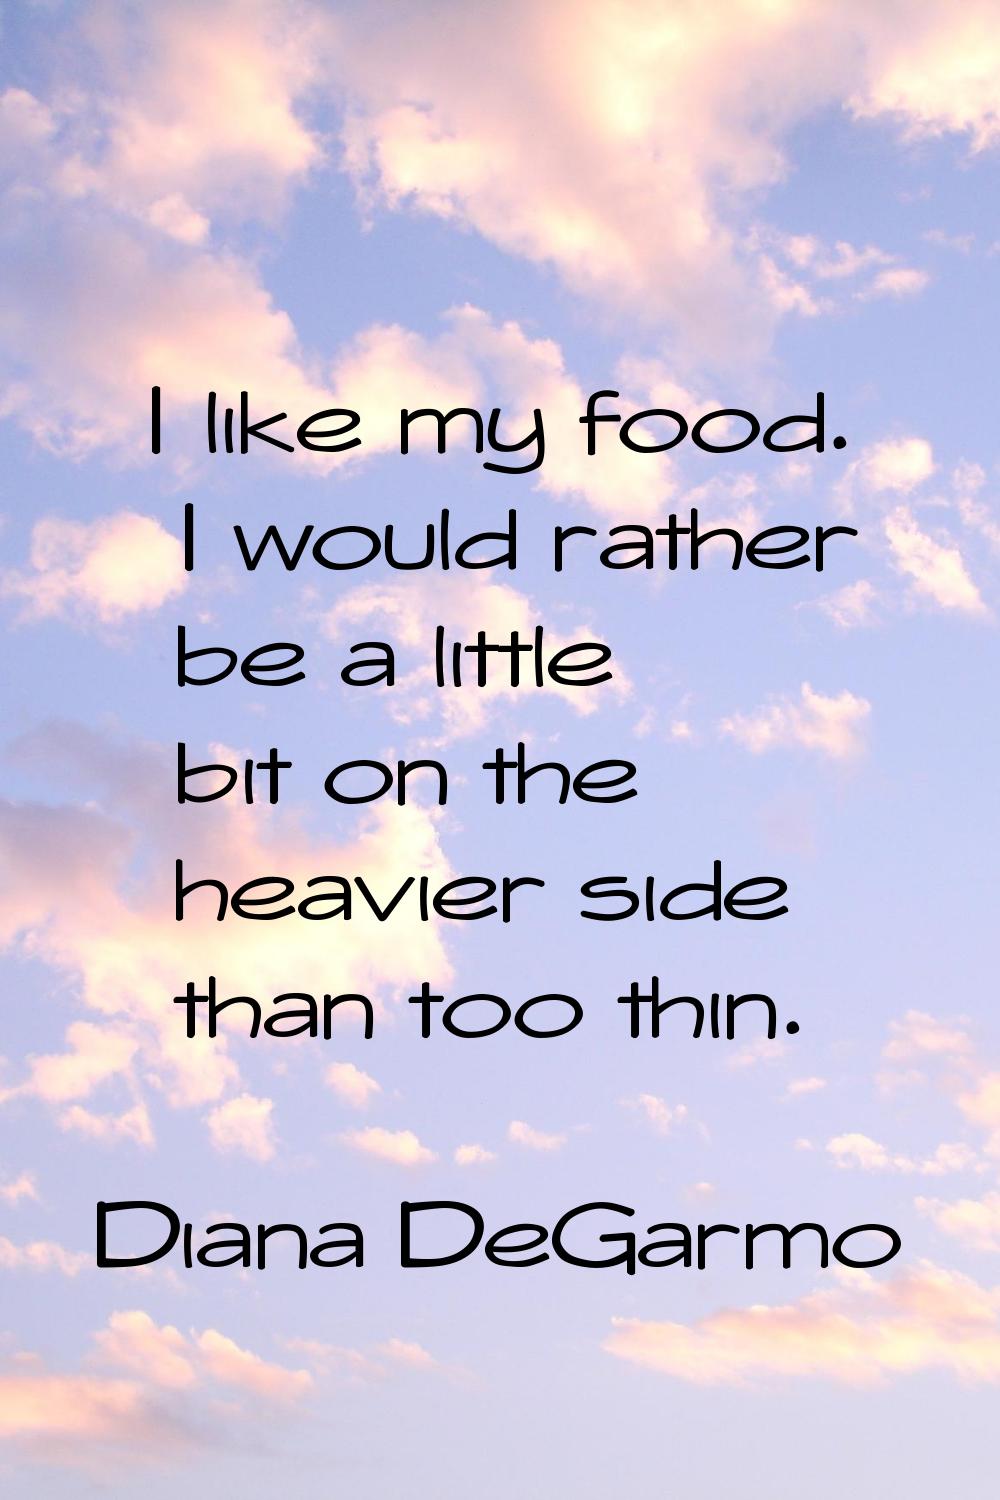 I like my food. I would rather be a little bit on the heavier side than too thin.